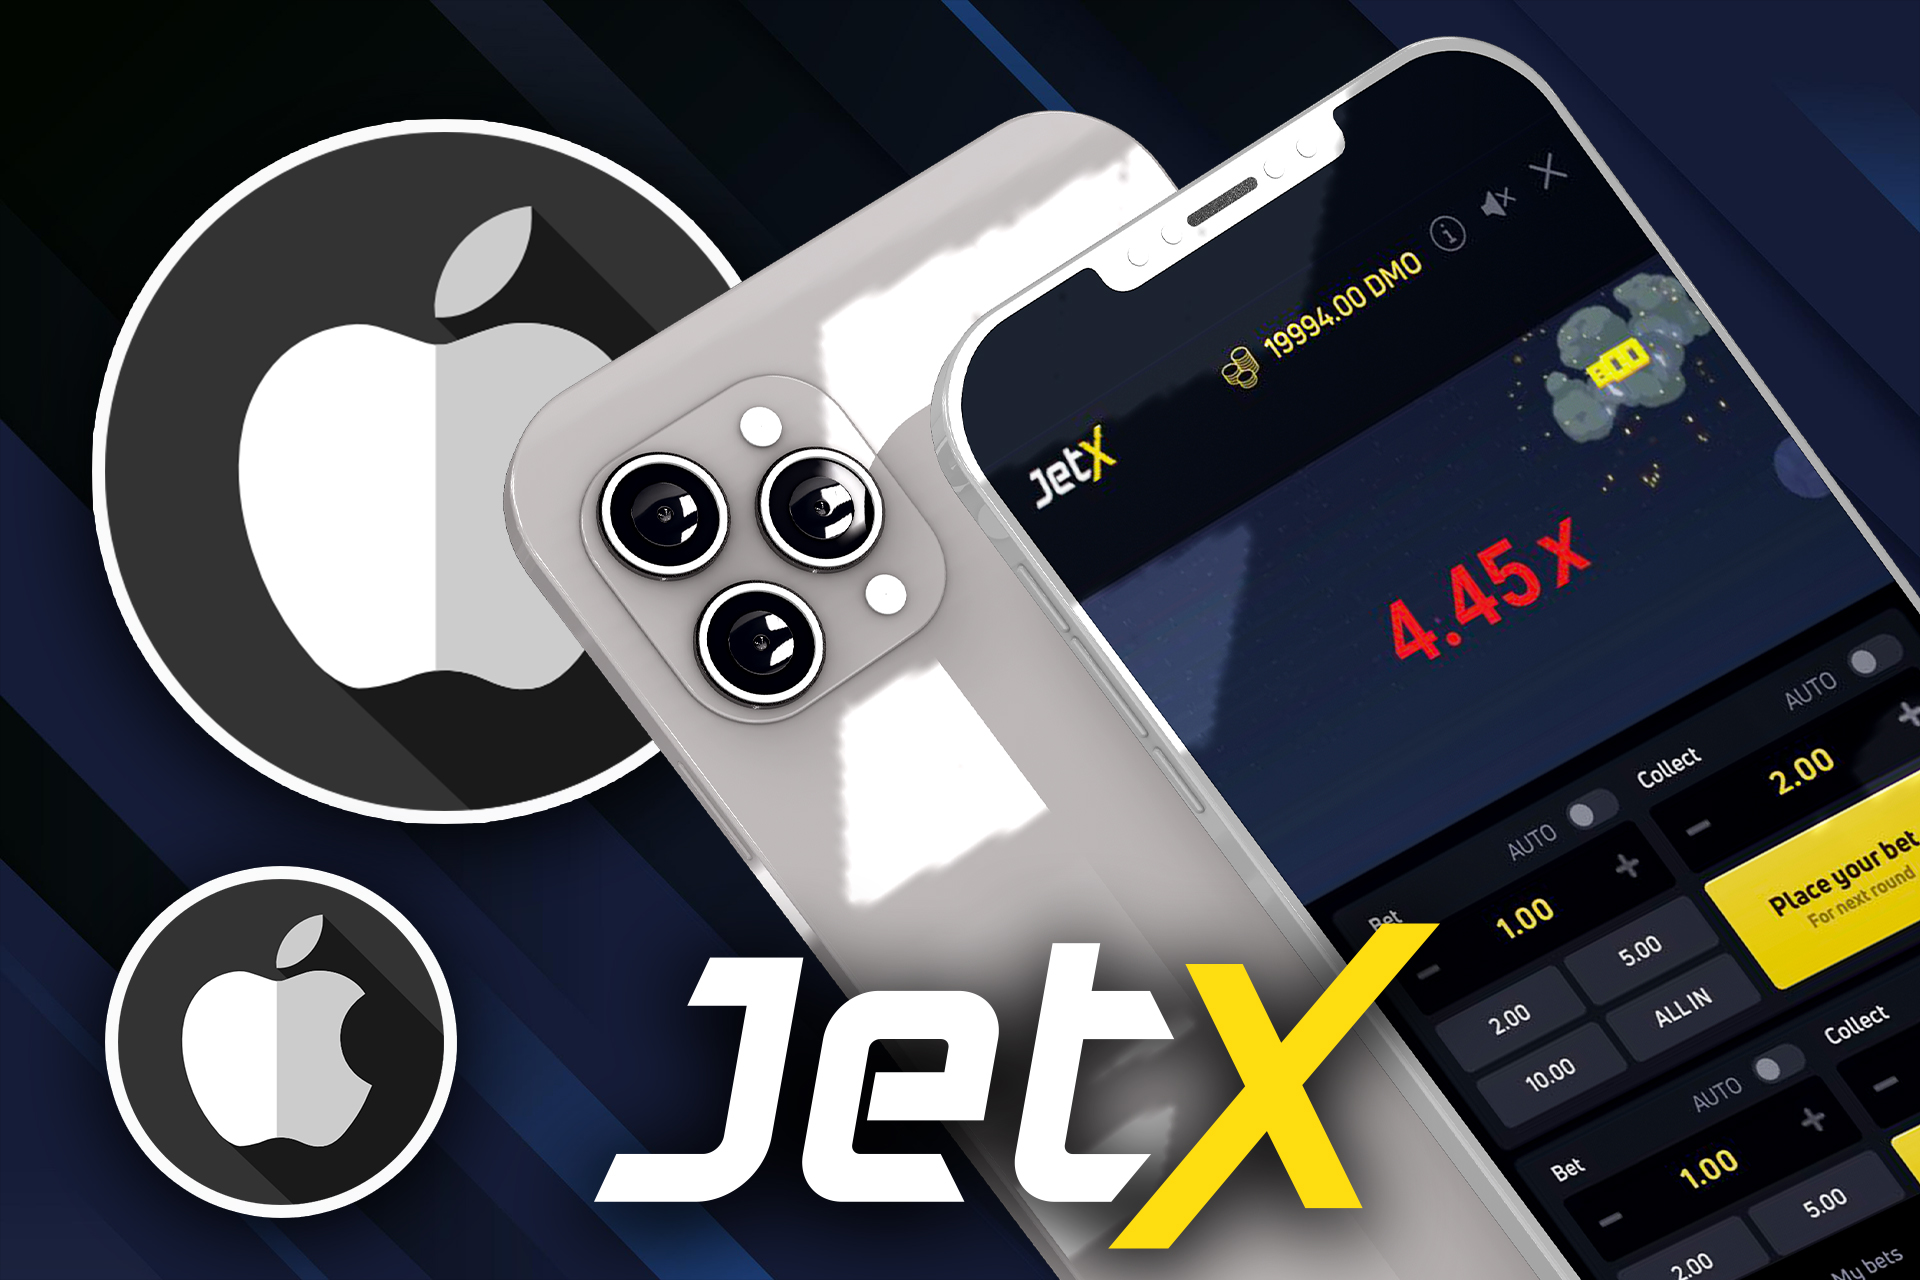 You can play Jet X via the 1win app on your iPhone.